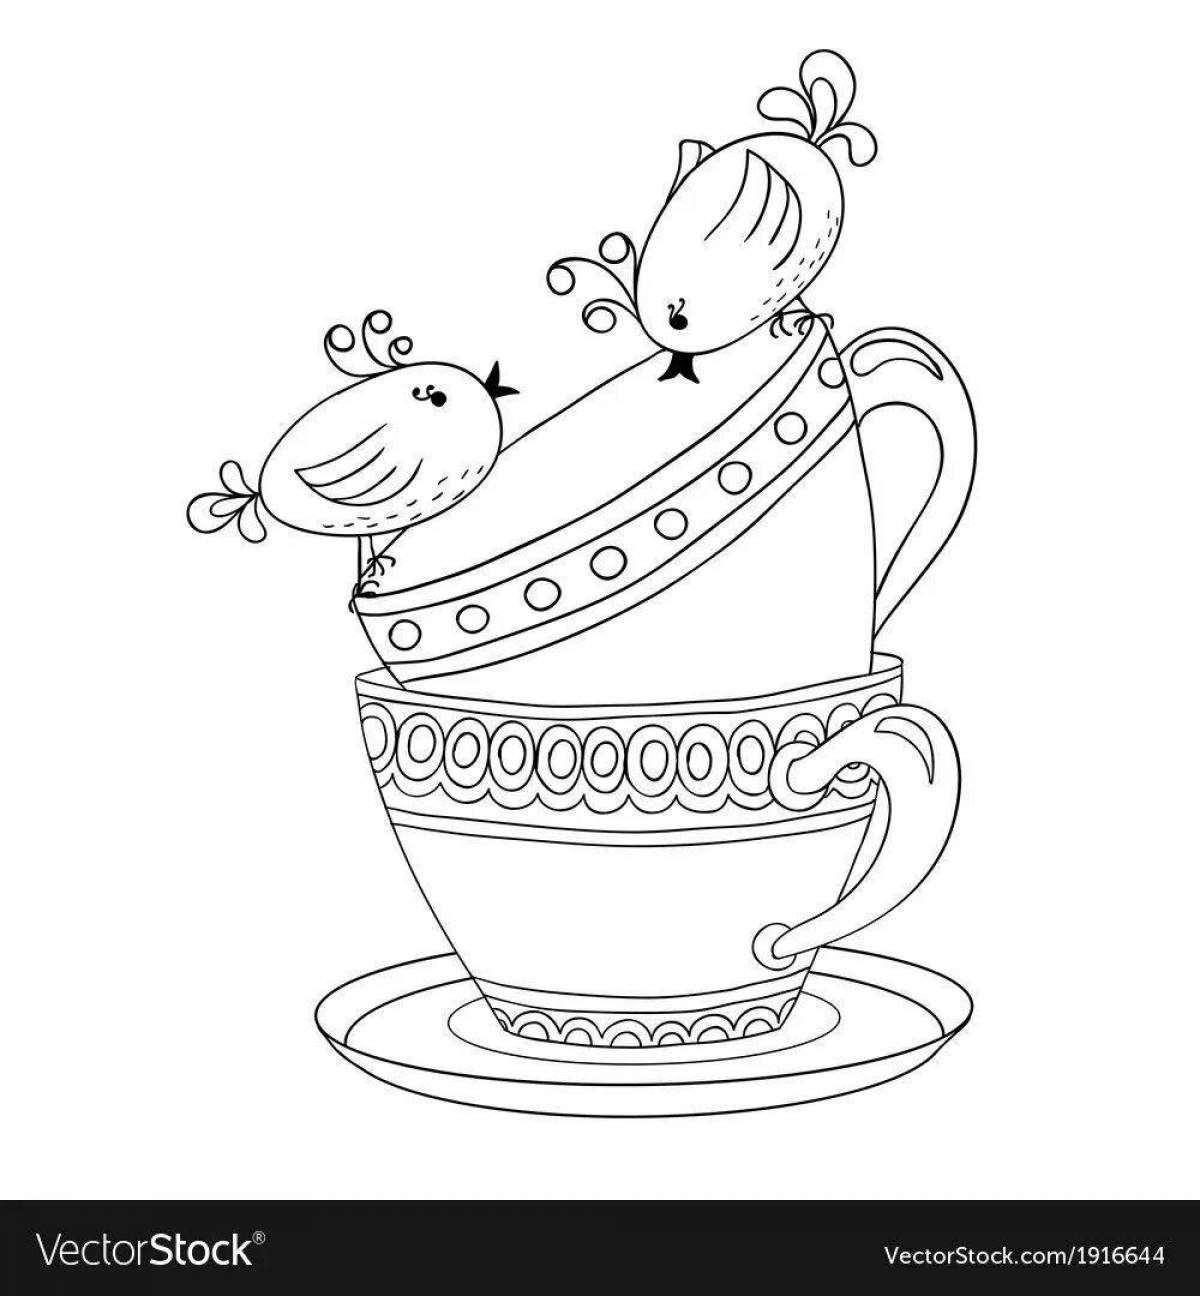 Bright samovar coloring book for children 3-4 years old